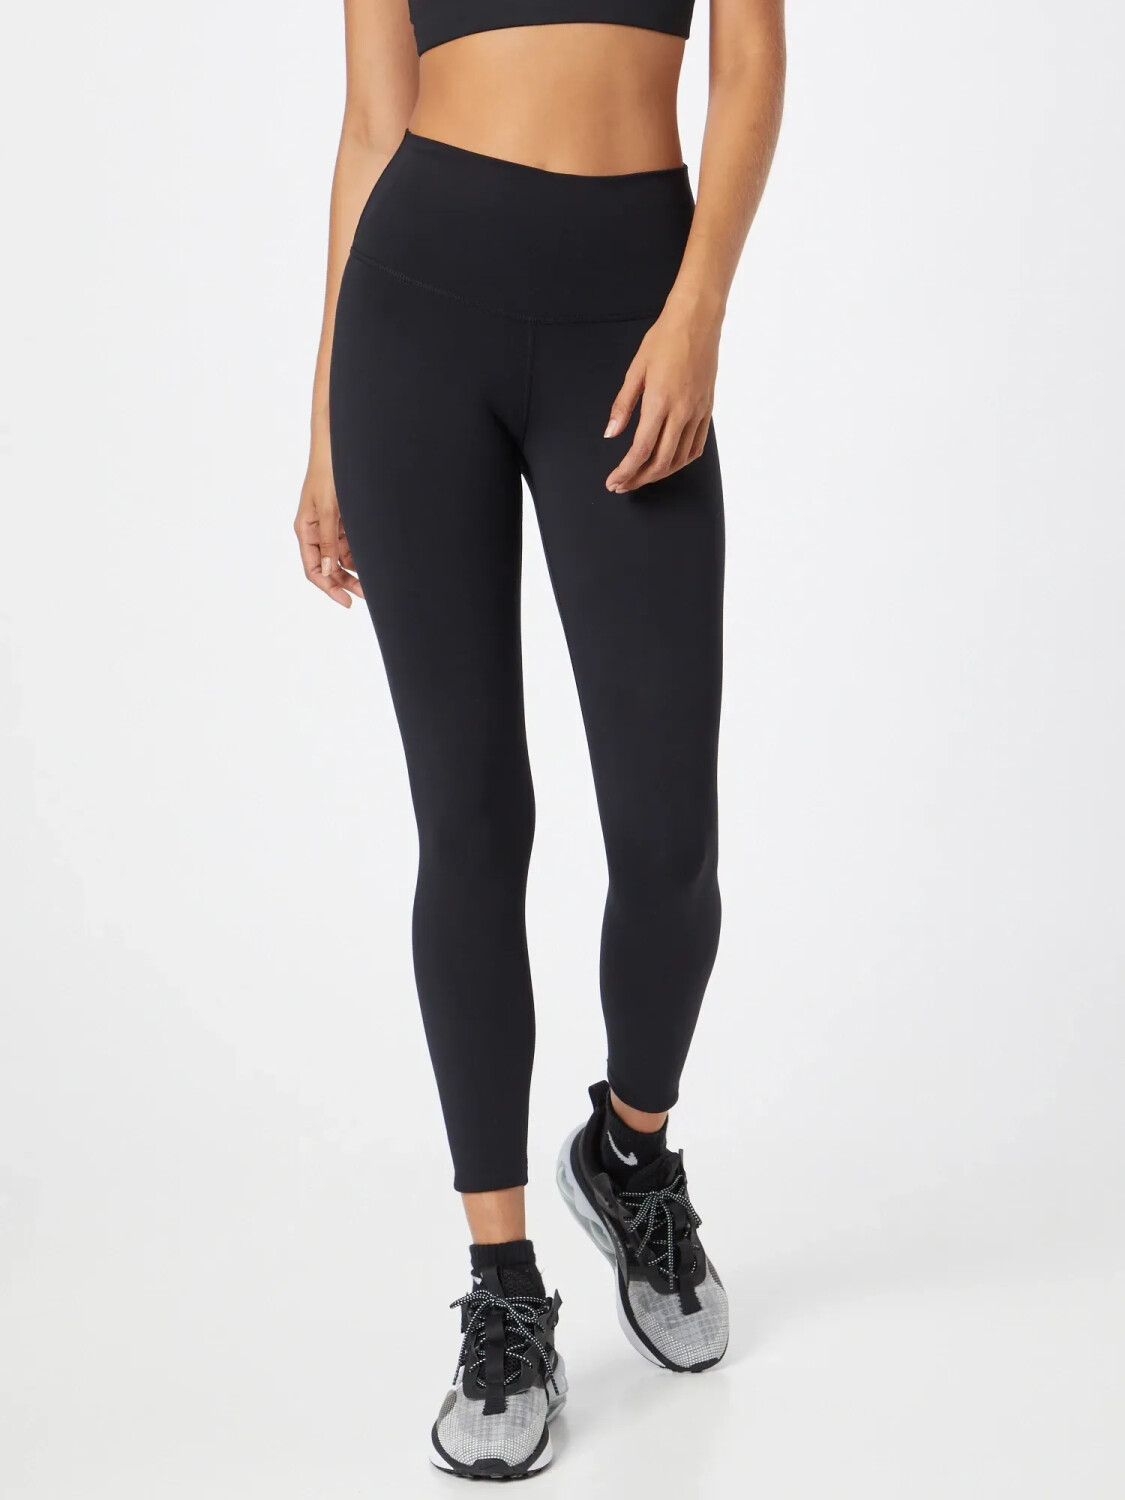 Buy Nike Yoga 7/8 Tight Dri-Fit High-Rise (DM7023) from £25.00